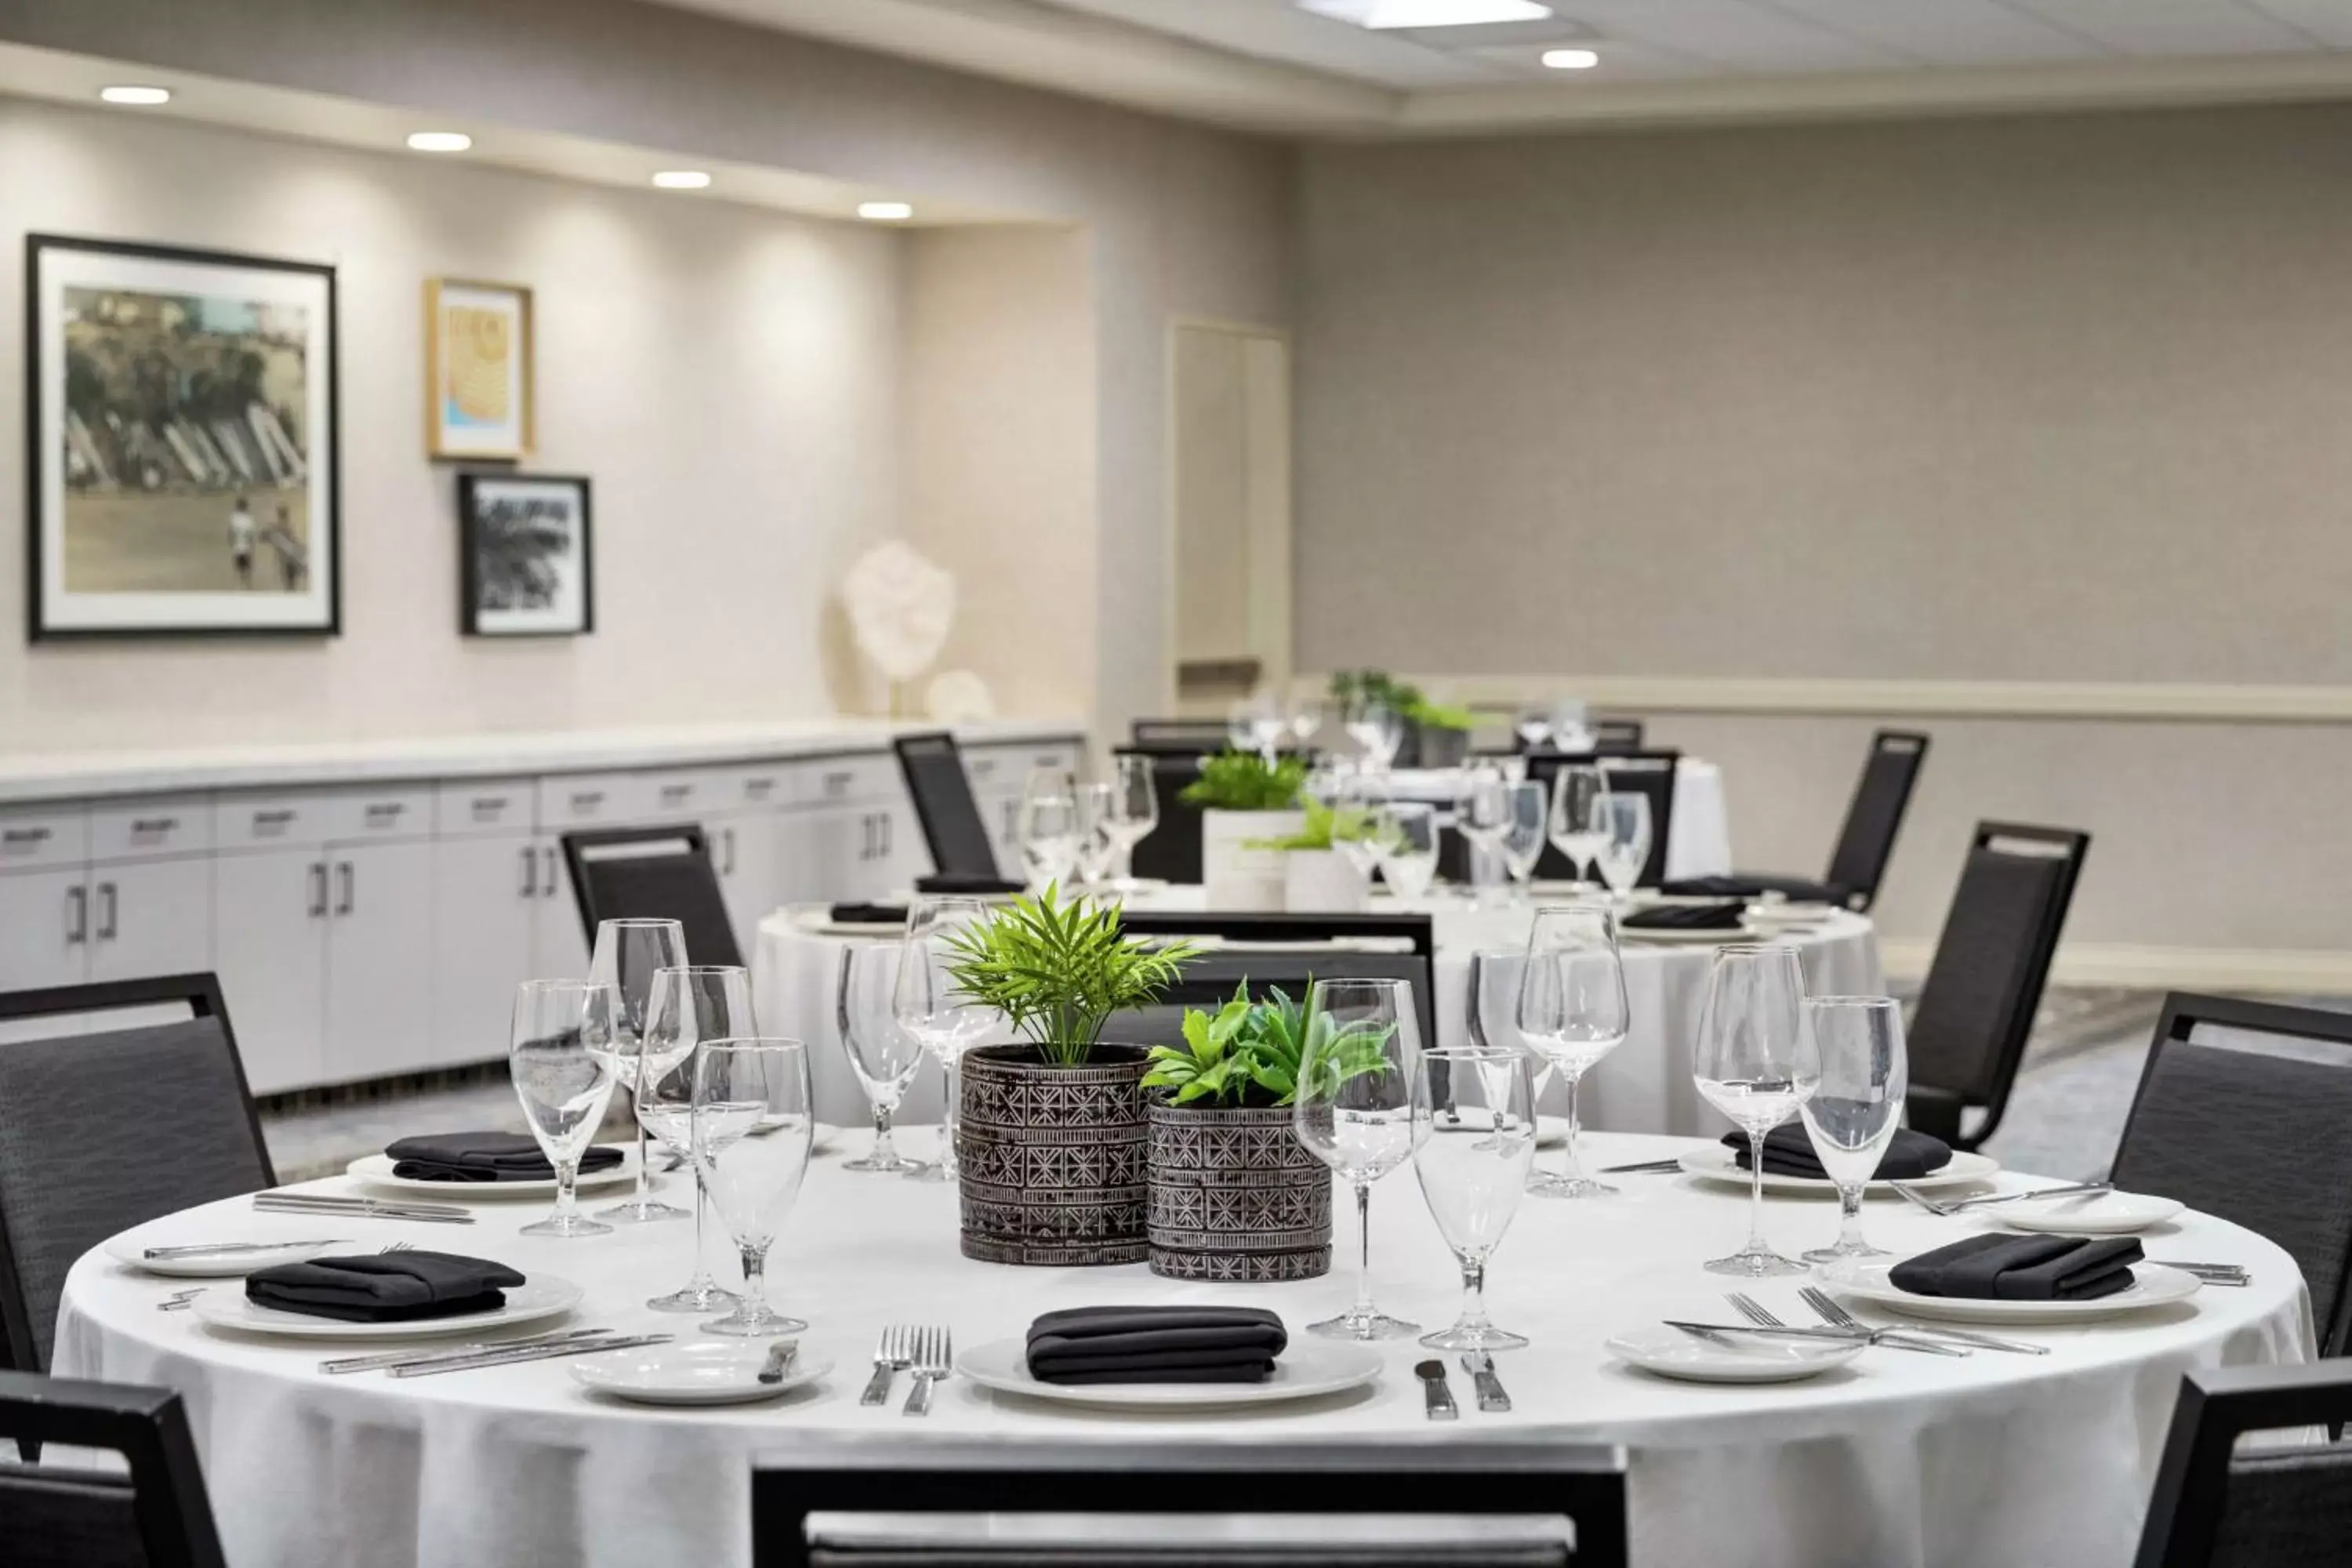 Meeting/conference room, Restaurant/Places to Eat in Hilton Garden Inn Carlsbad Beach